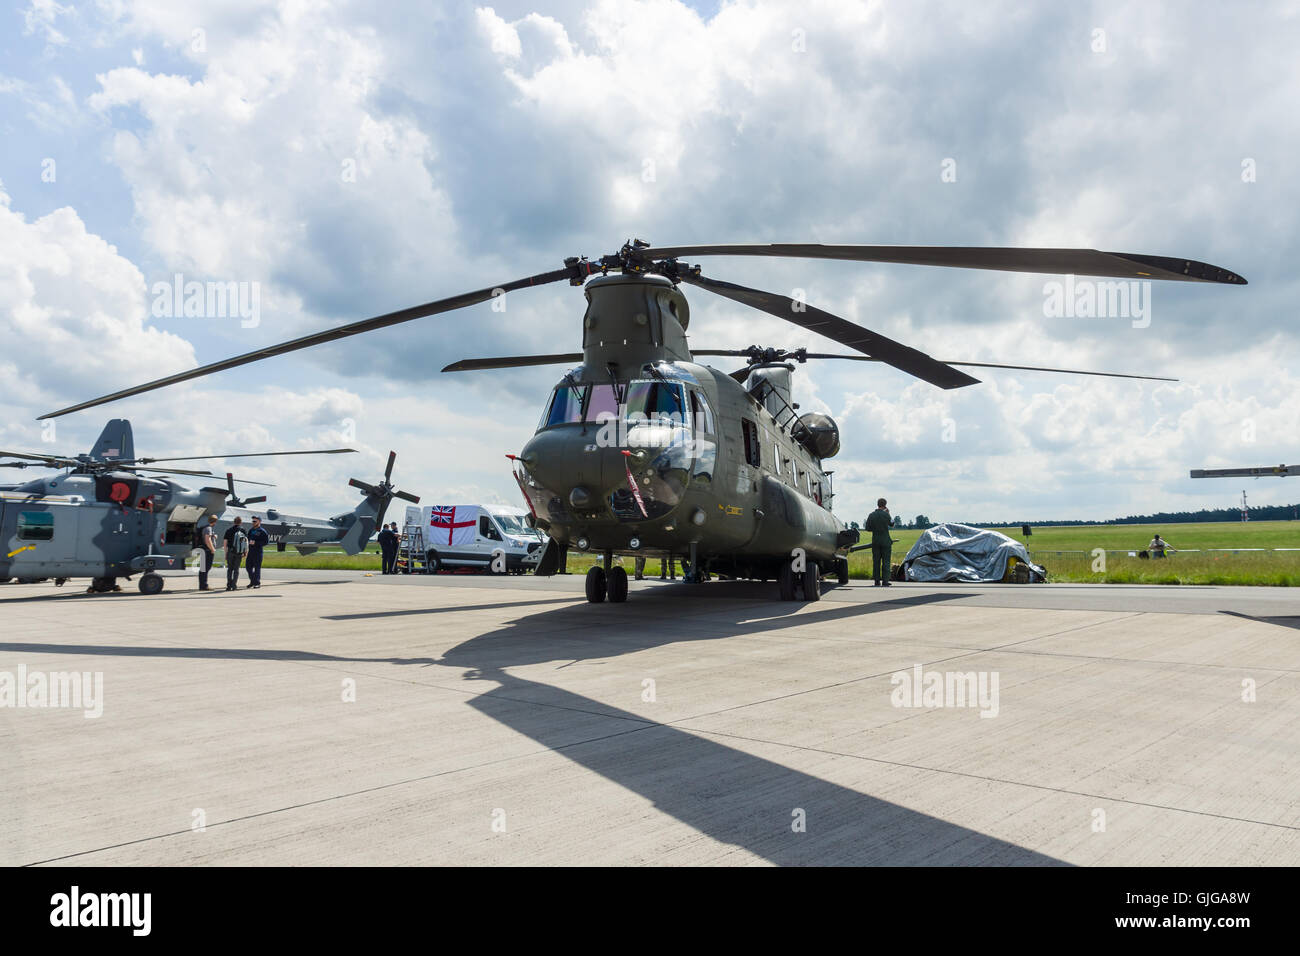 The twin-engine, tandem rotor heavy-lift helicopter Boeing CH-47 Chinook. US Army. Stock Photo